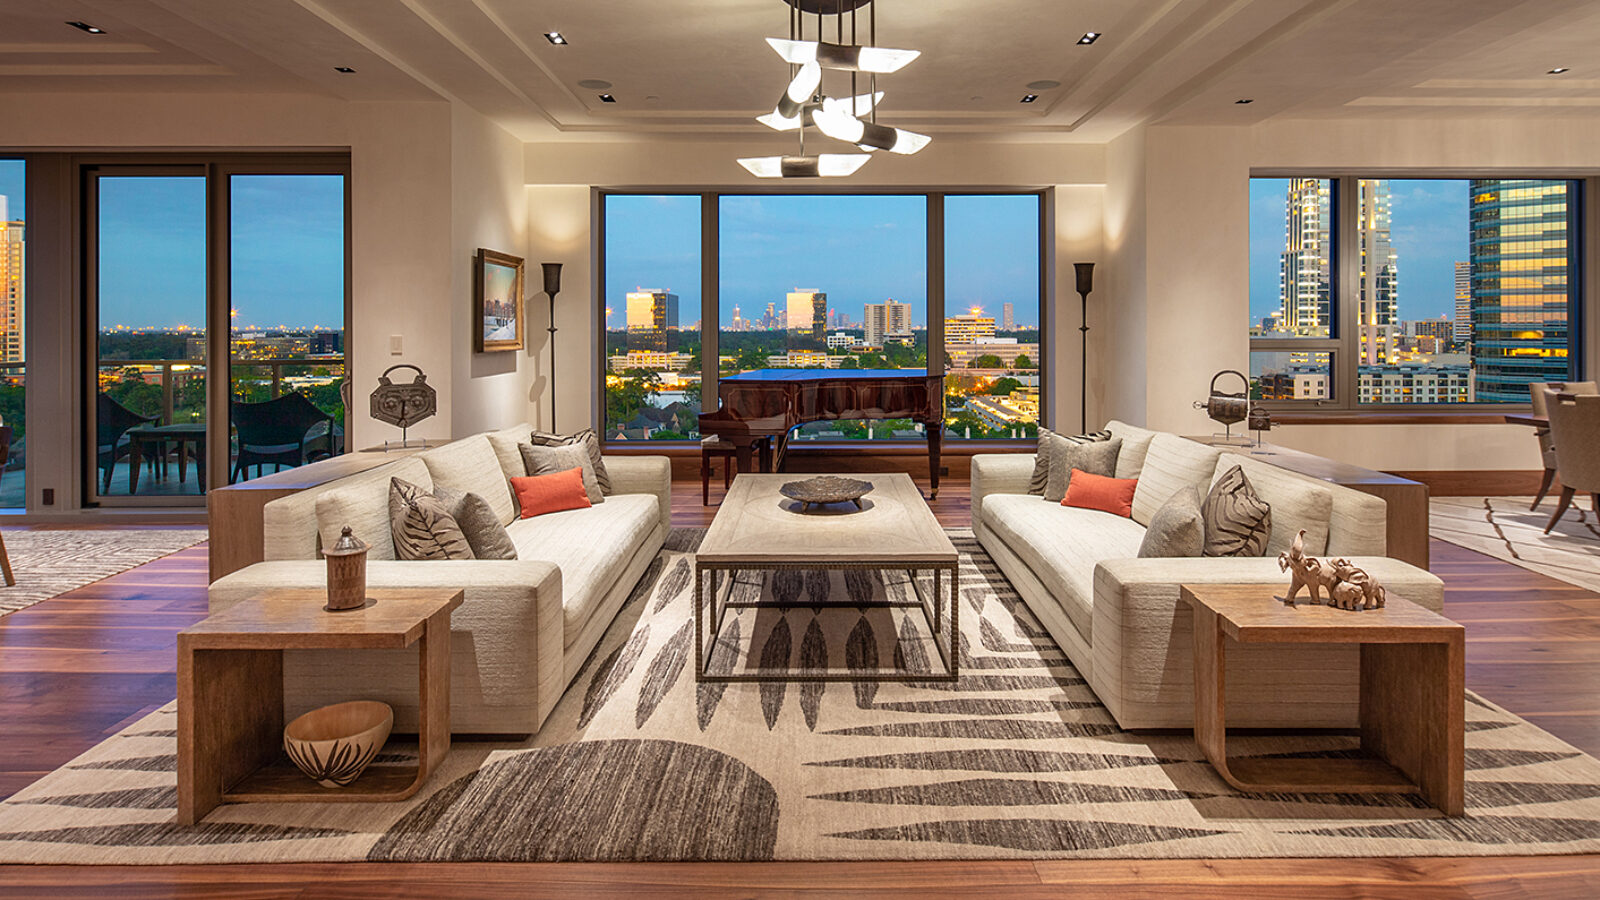 Open concept living room with views of the city through floor to celling windows